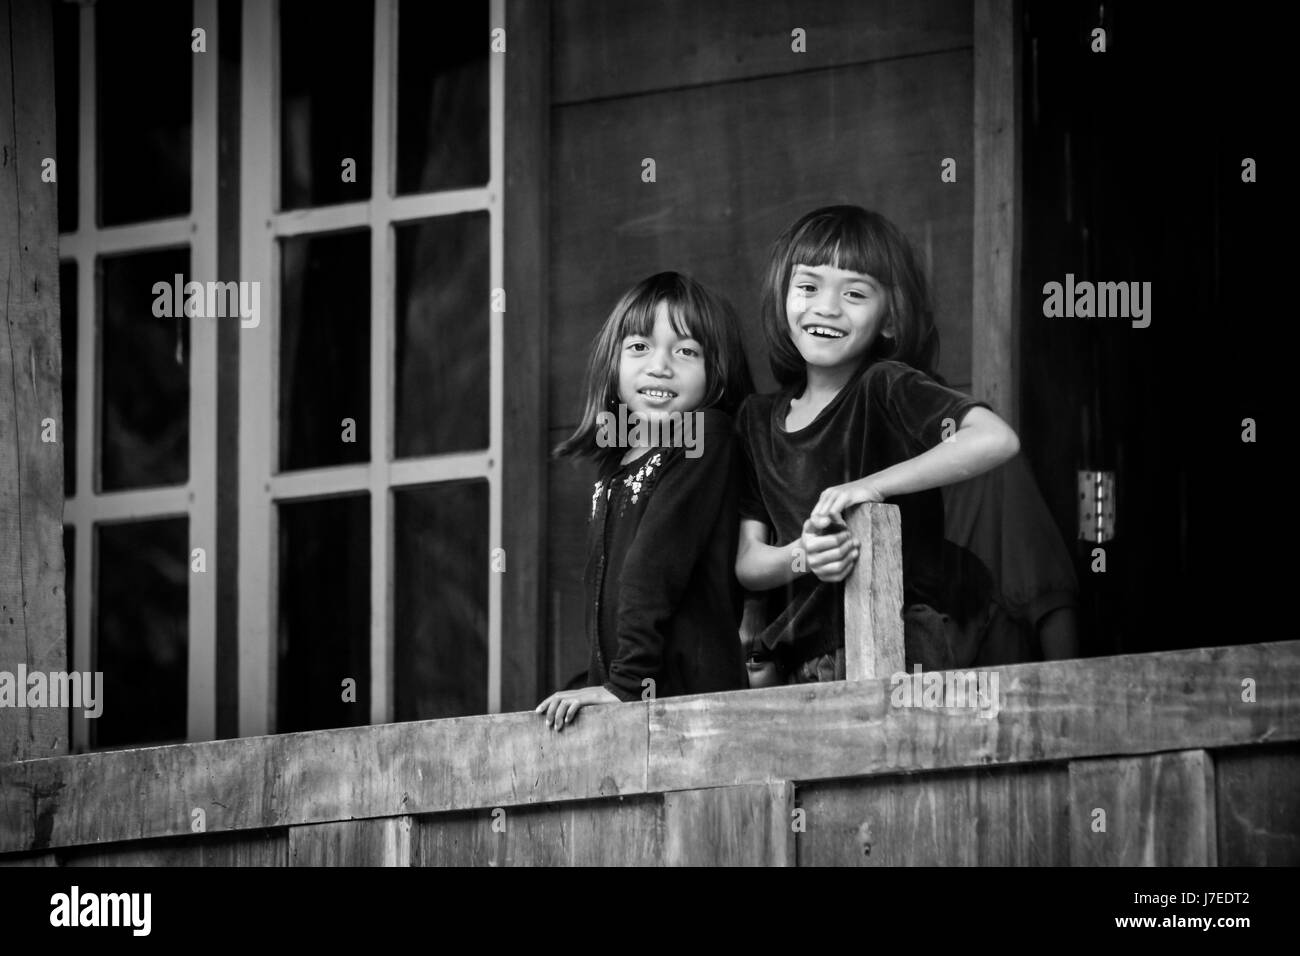 Beautiful black and white candid natural portrait image of smiling kids from the indigenous race of Torajan people in Sulawesi standing on balcony Stock Photo